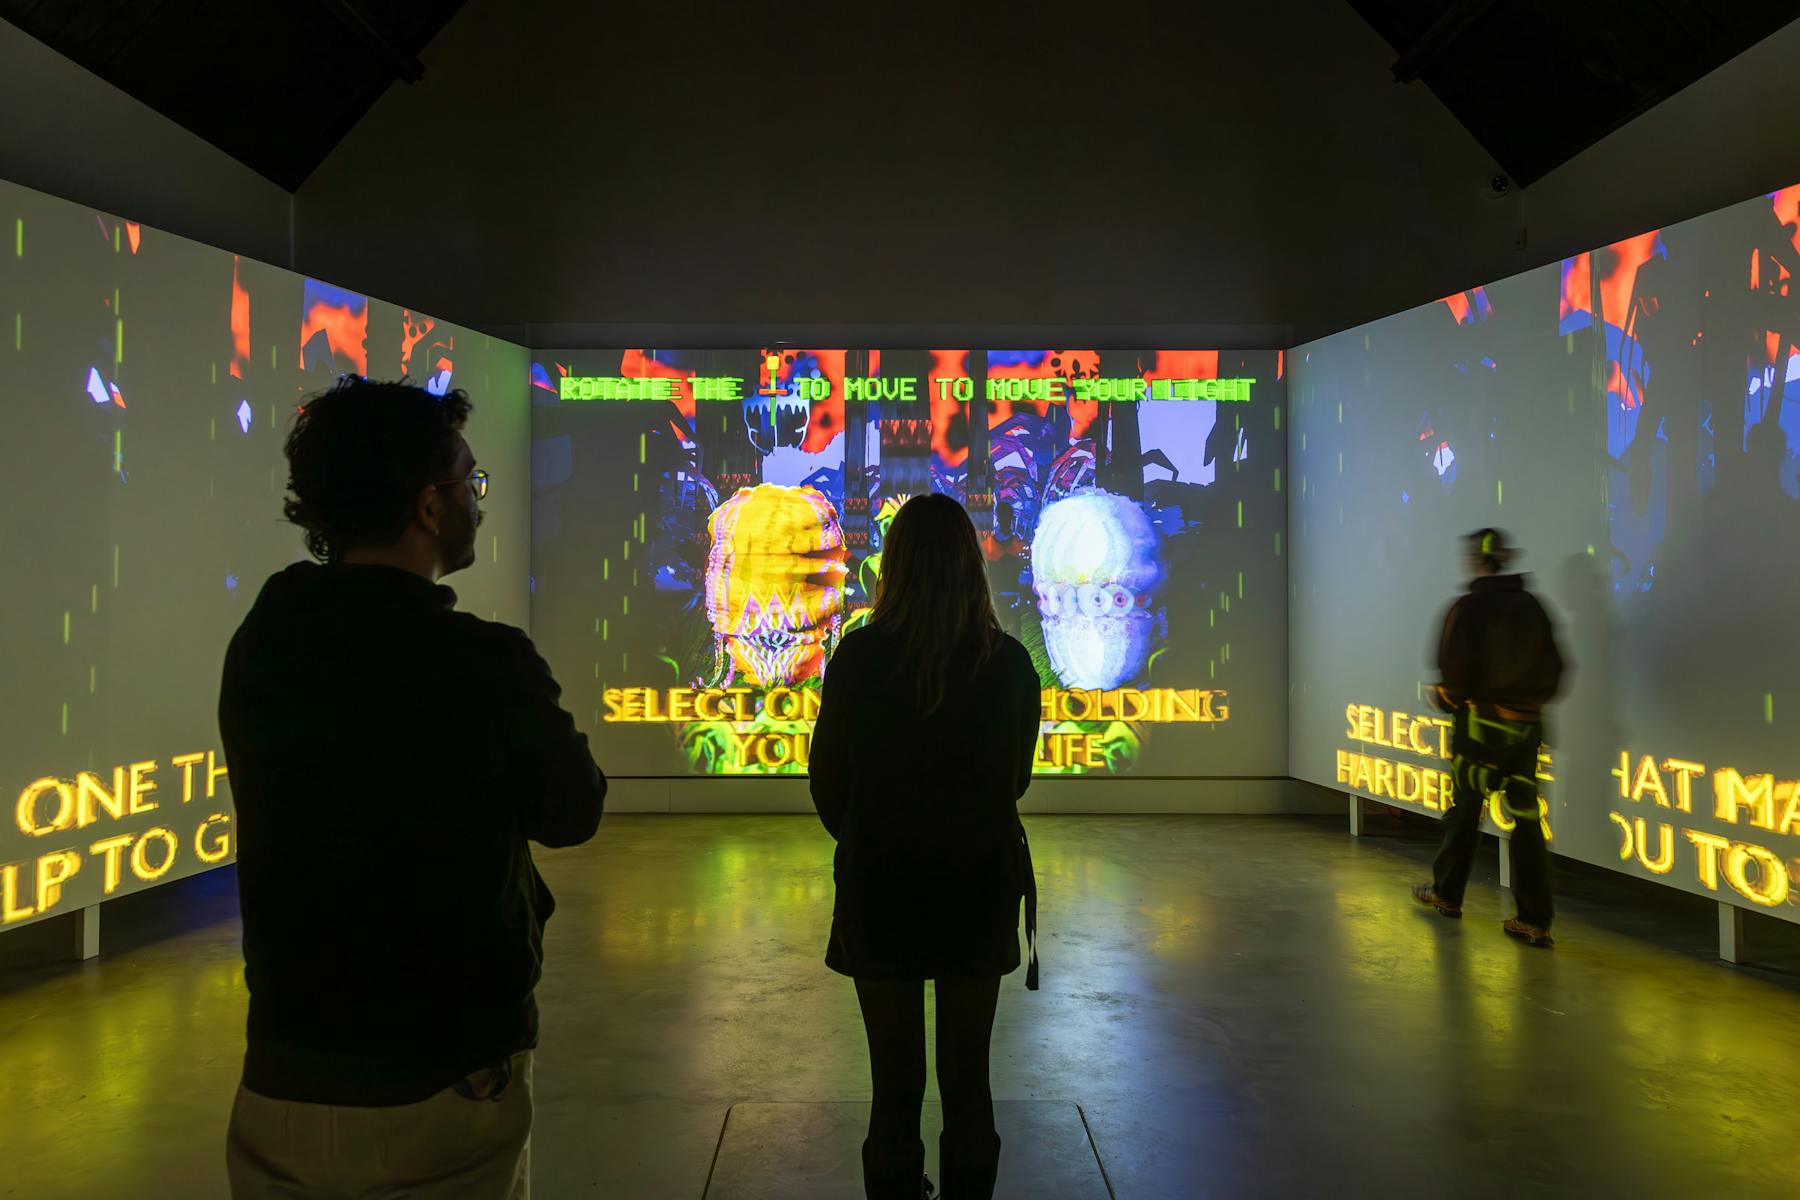 Three people  face three large wall-sized screens, projected with a game. The screen shows a landing page where users can select a playable character.